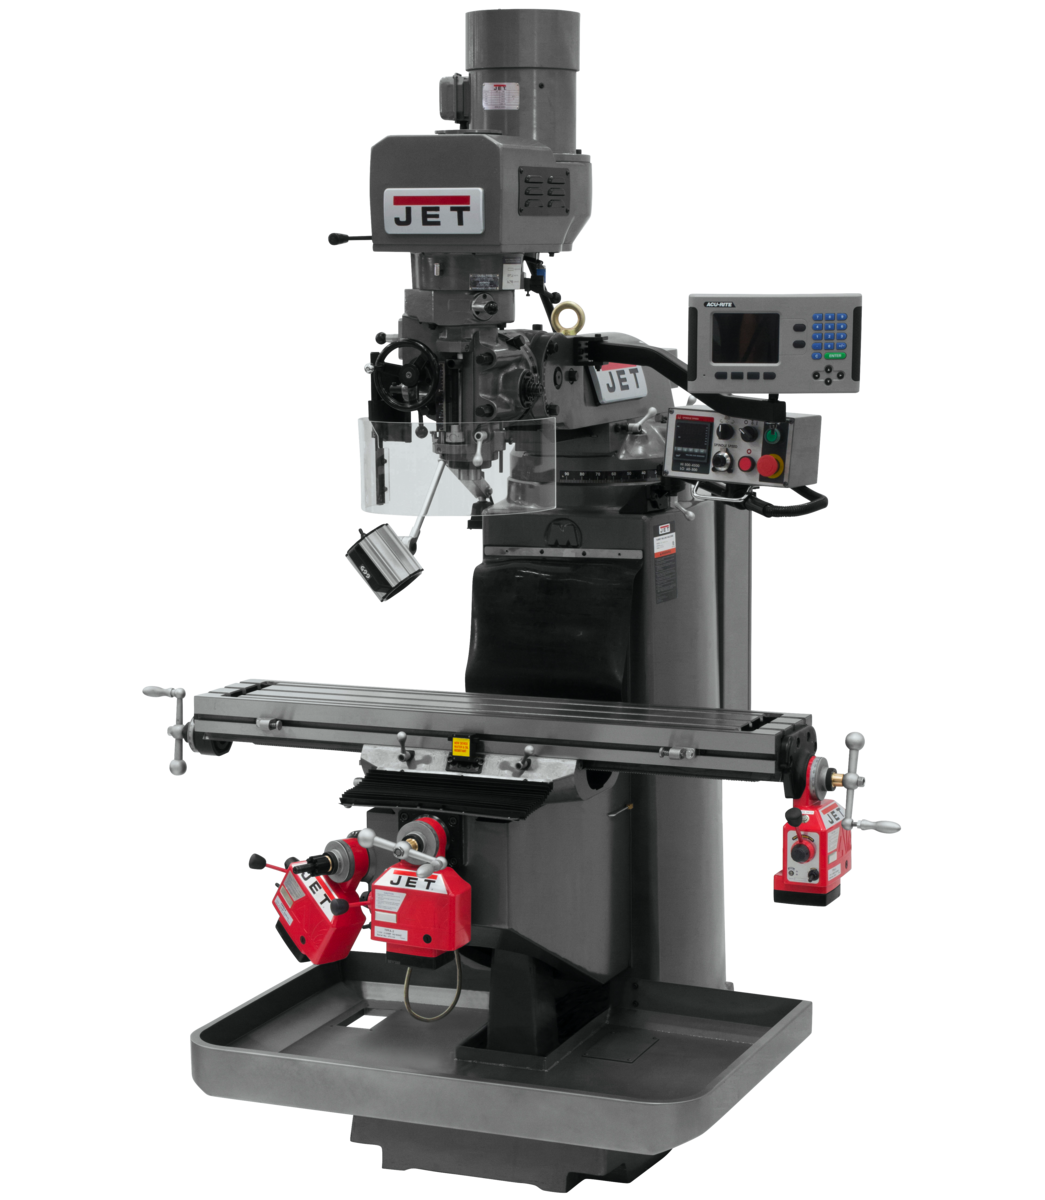 JTM-949EVS Mill With 3-Axis Acu-Rite 203 DRO (Quill) With X, Y and Z-Axis Powerfeeds